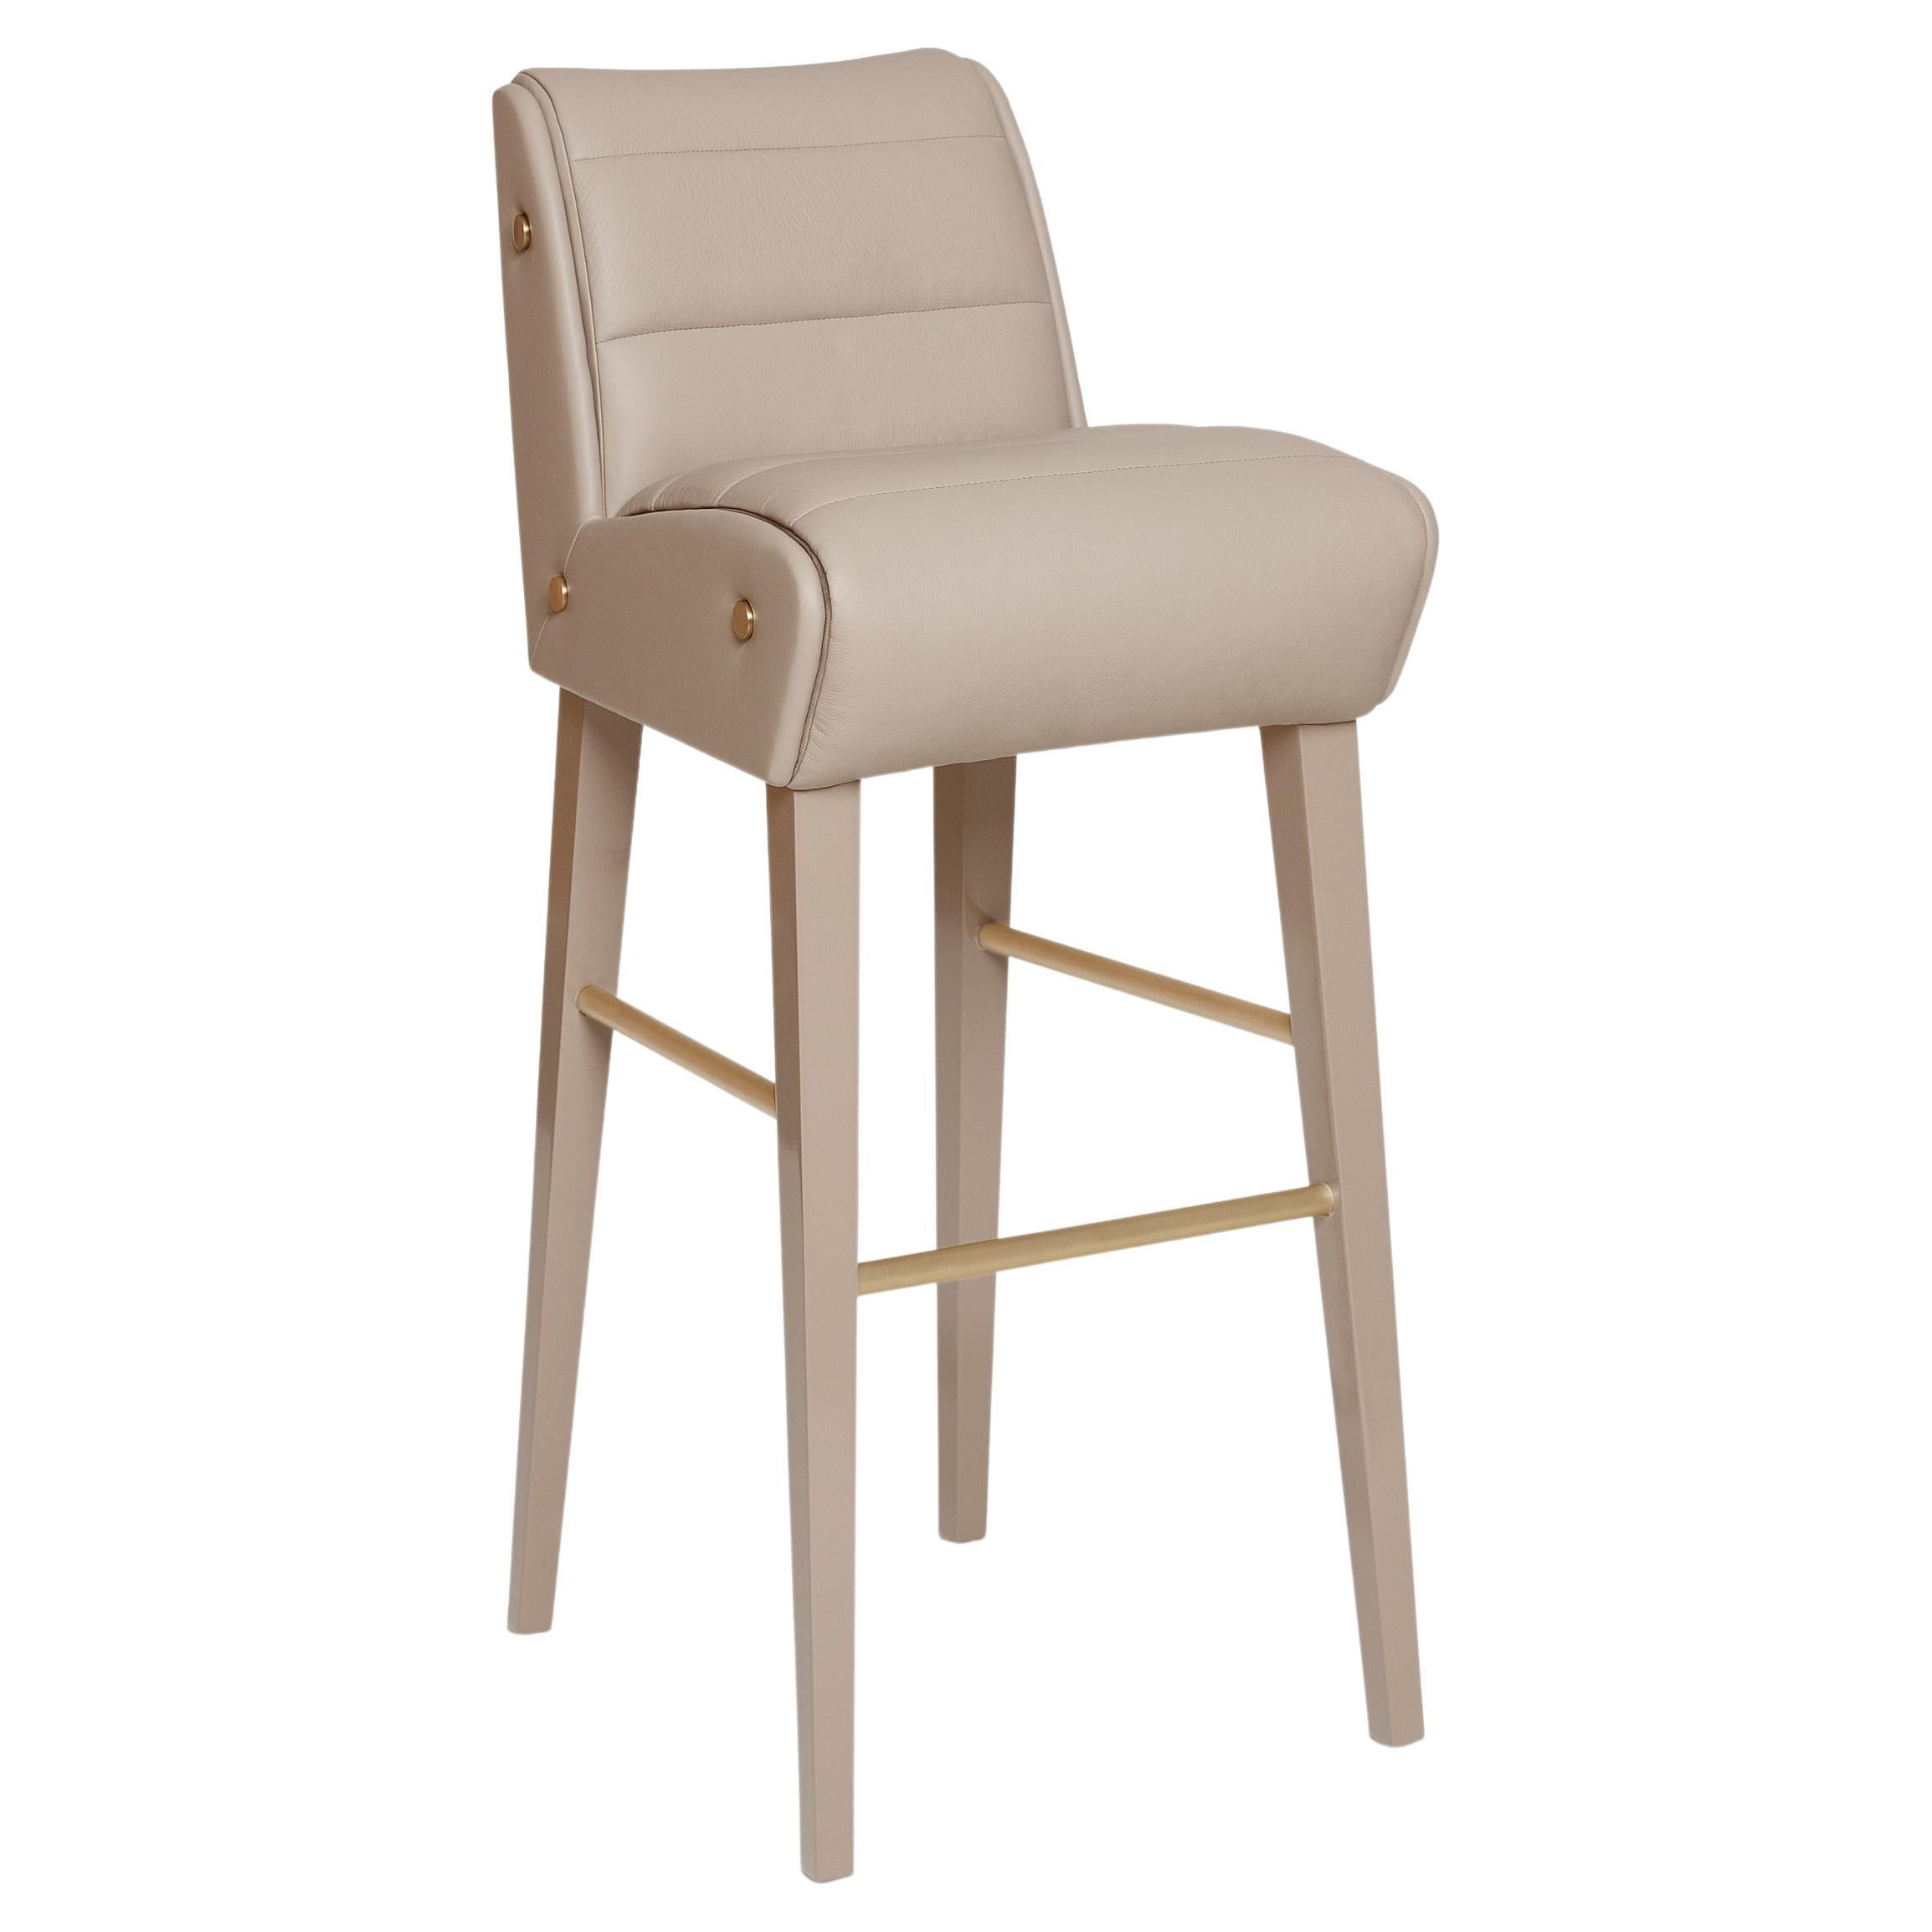 This barstool is an elevated homage to the golden age of gentleman drivers. The piece’s flawless structure is deceivingly simple, yet undeniably striking. The detailed upholstery and seaming bears the mark of true craftsmanship. Its sensuous lines